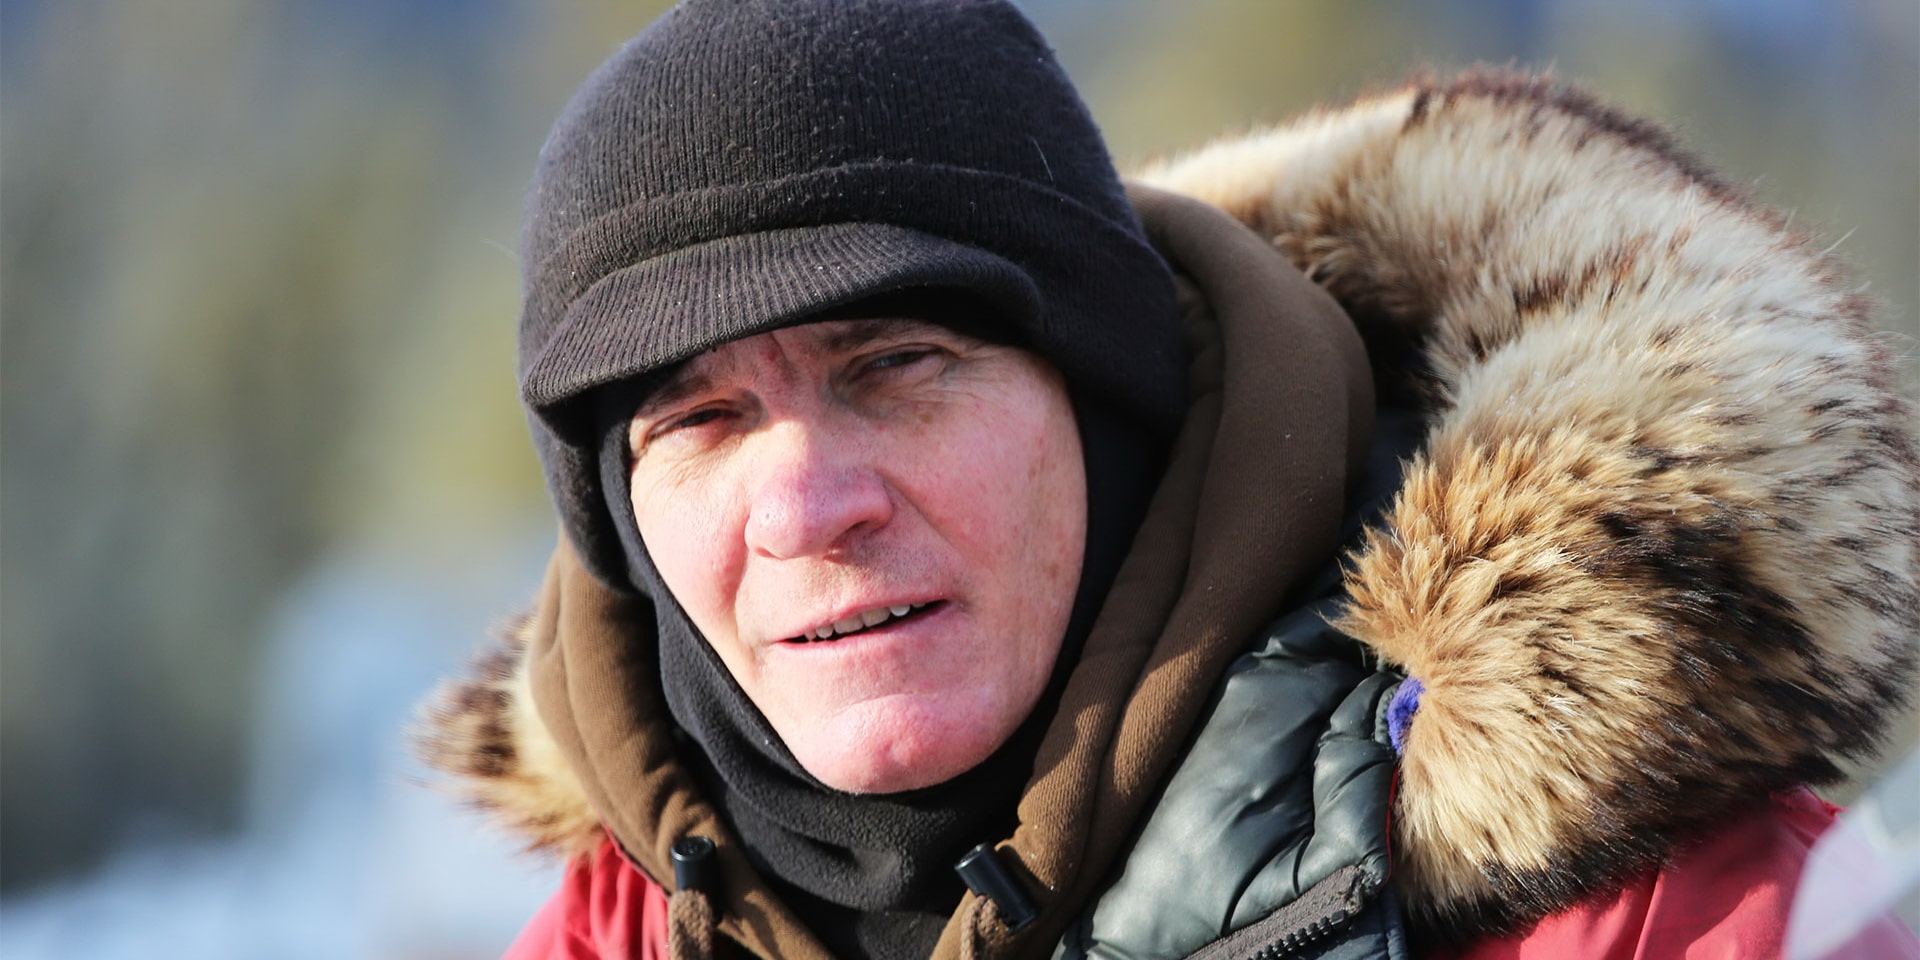 Andy Bassich From Life Below Zero: Everything We Know 